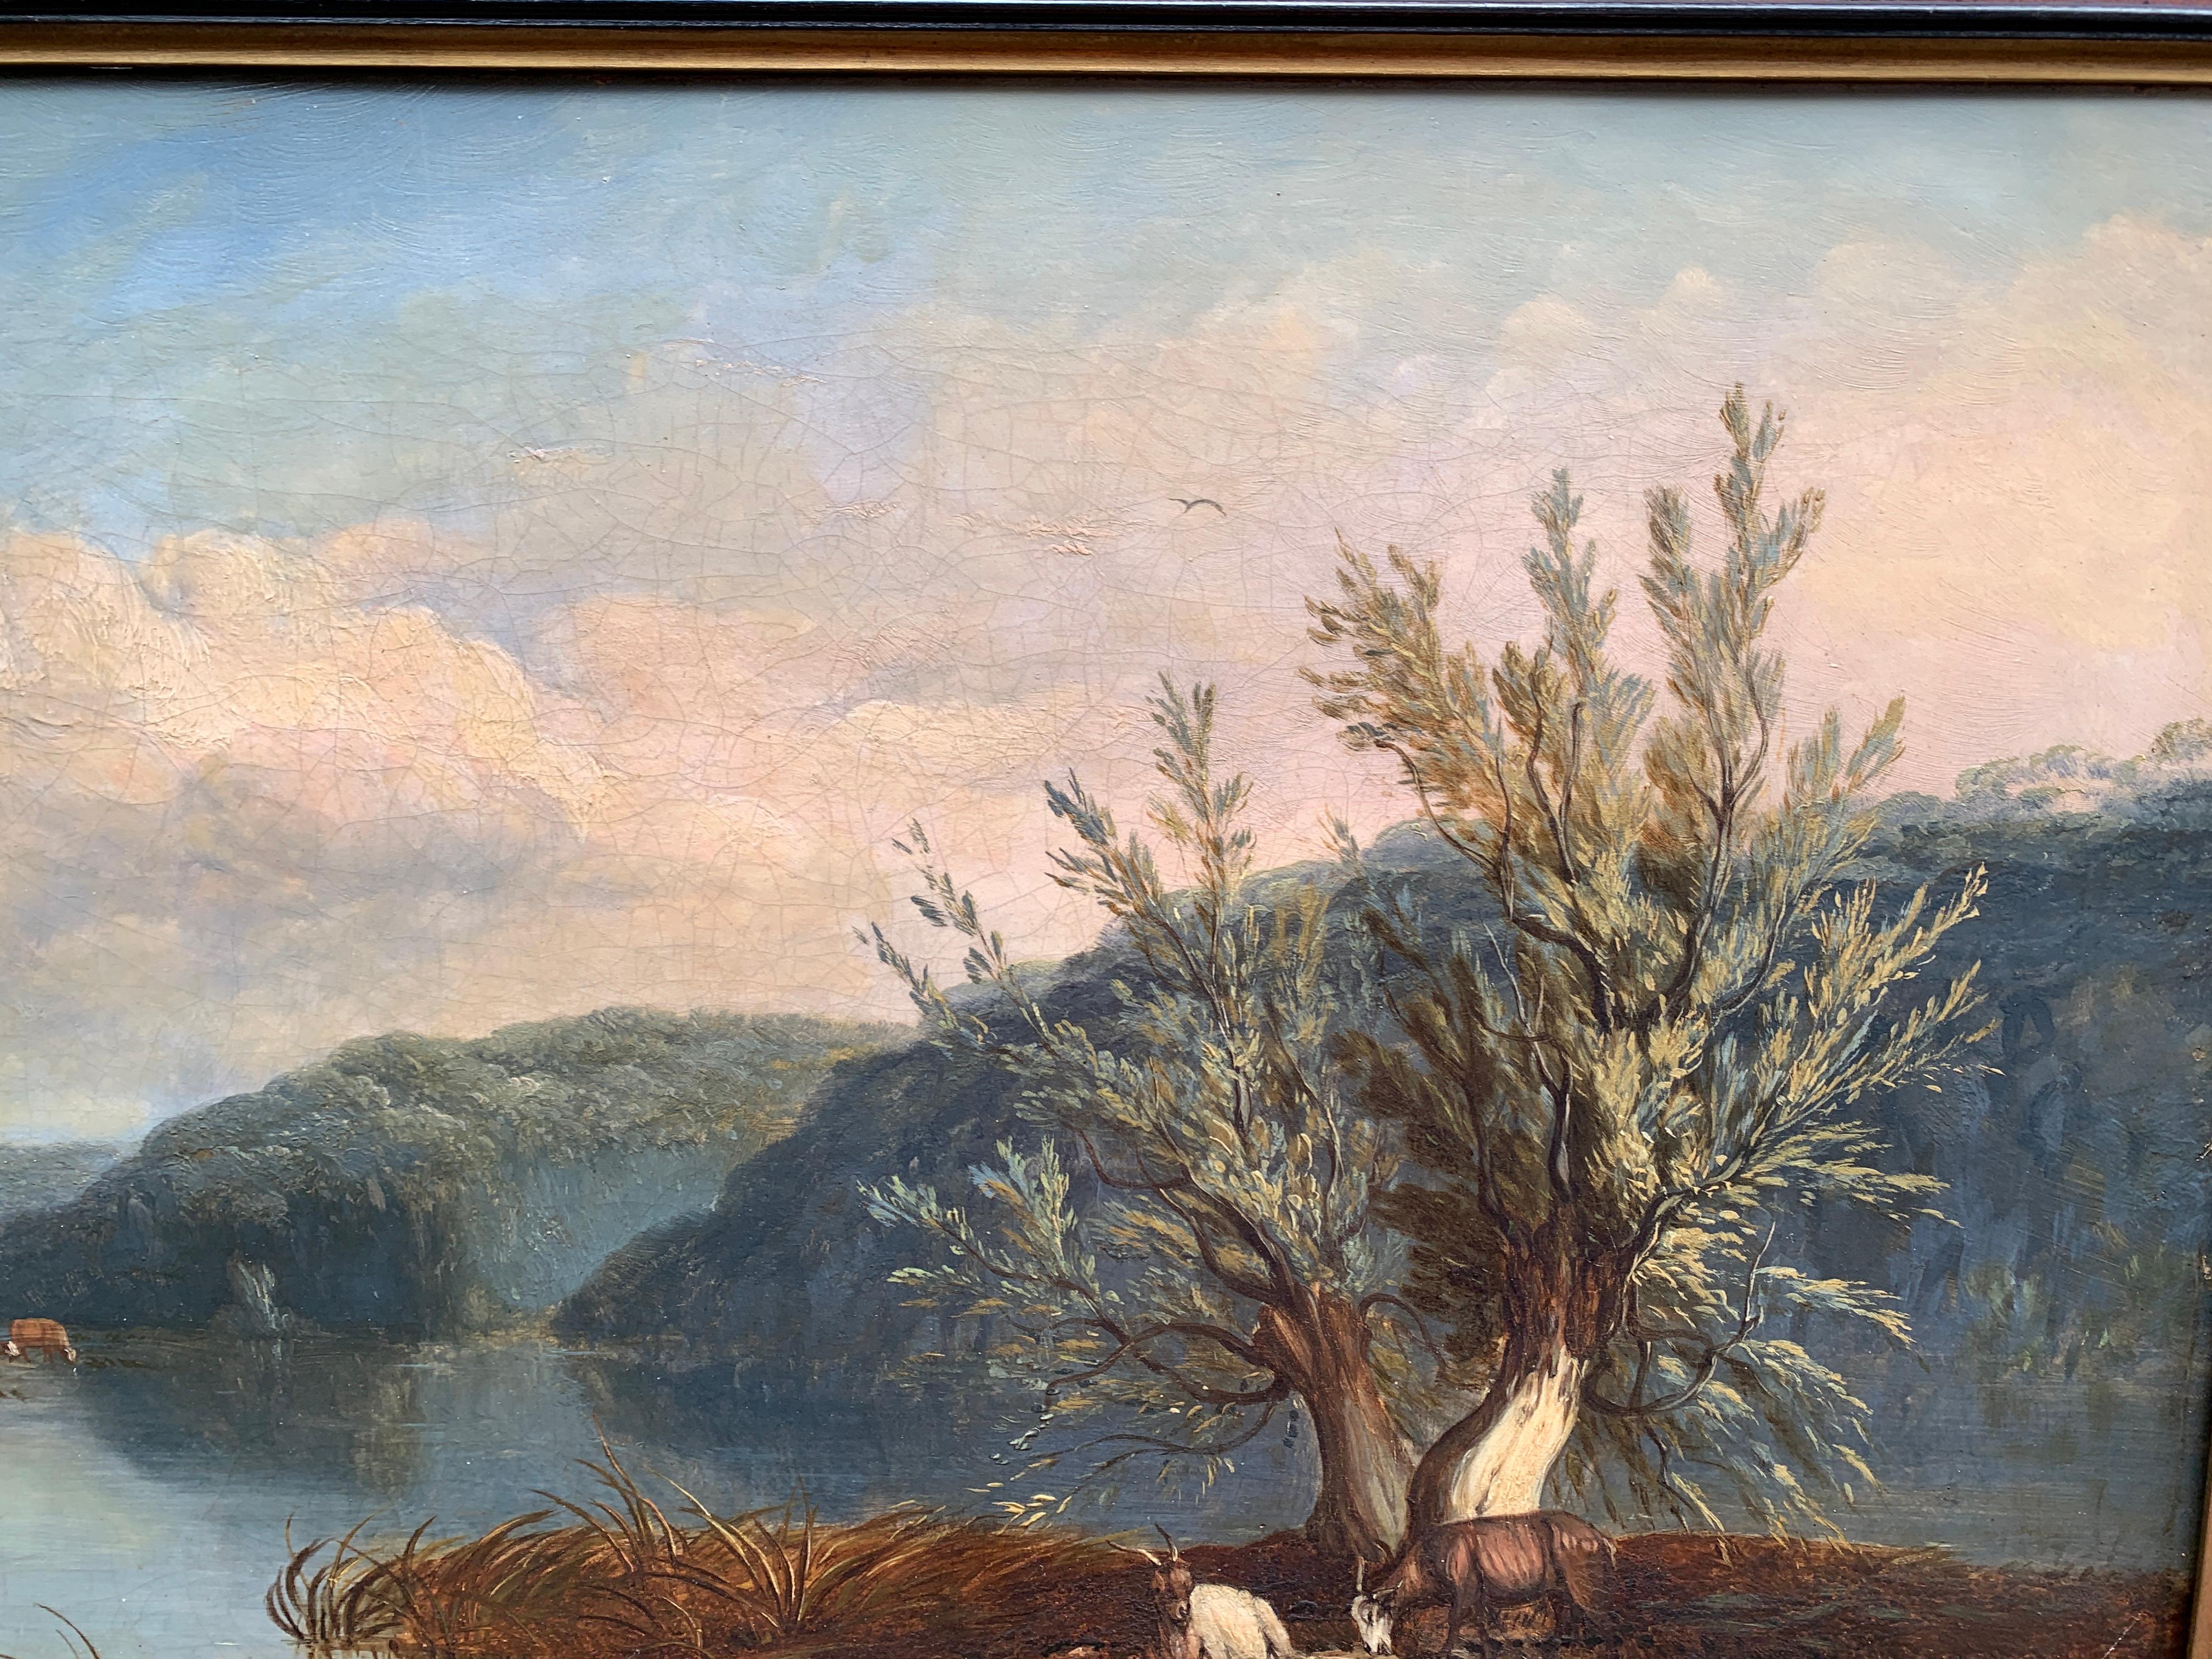 19th century English rural landscapes, with goats by a river and people For Sale 2